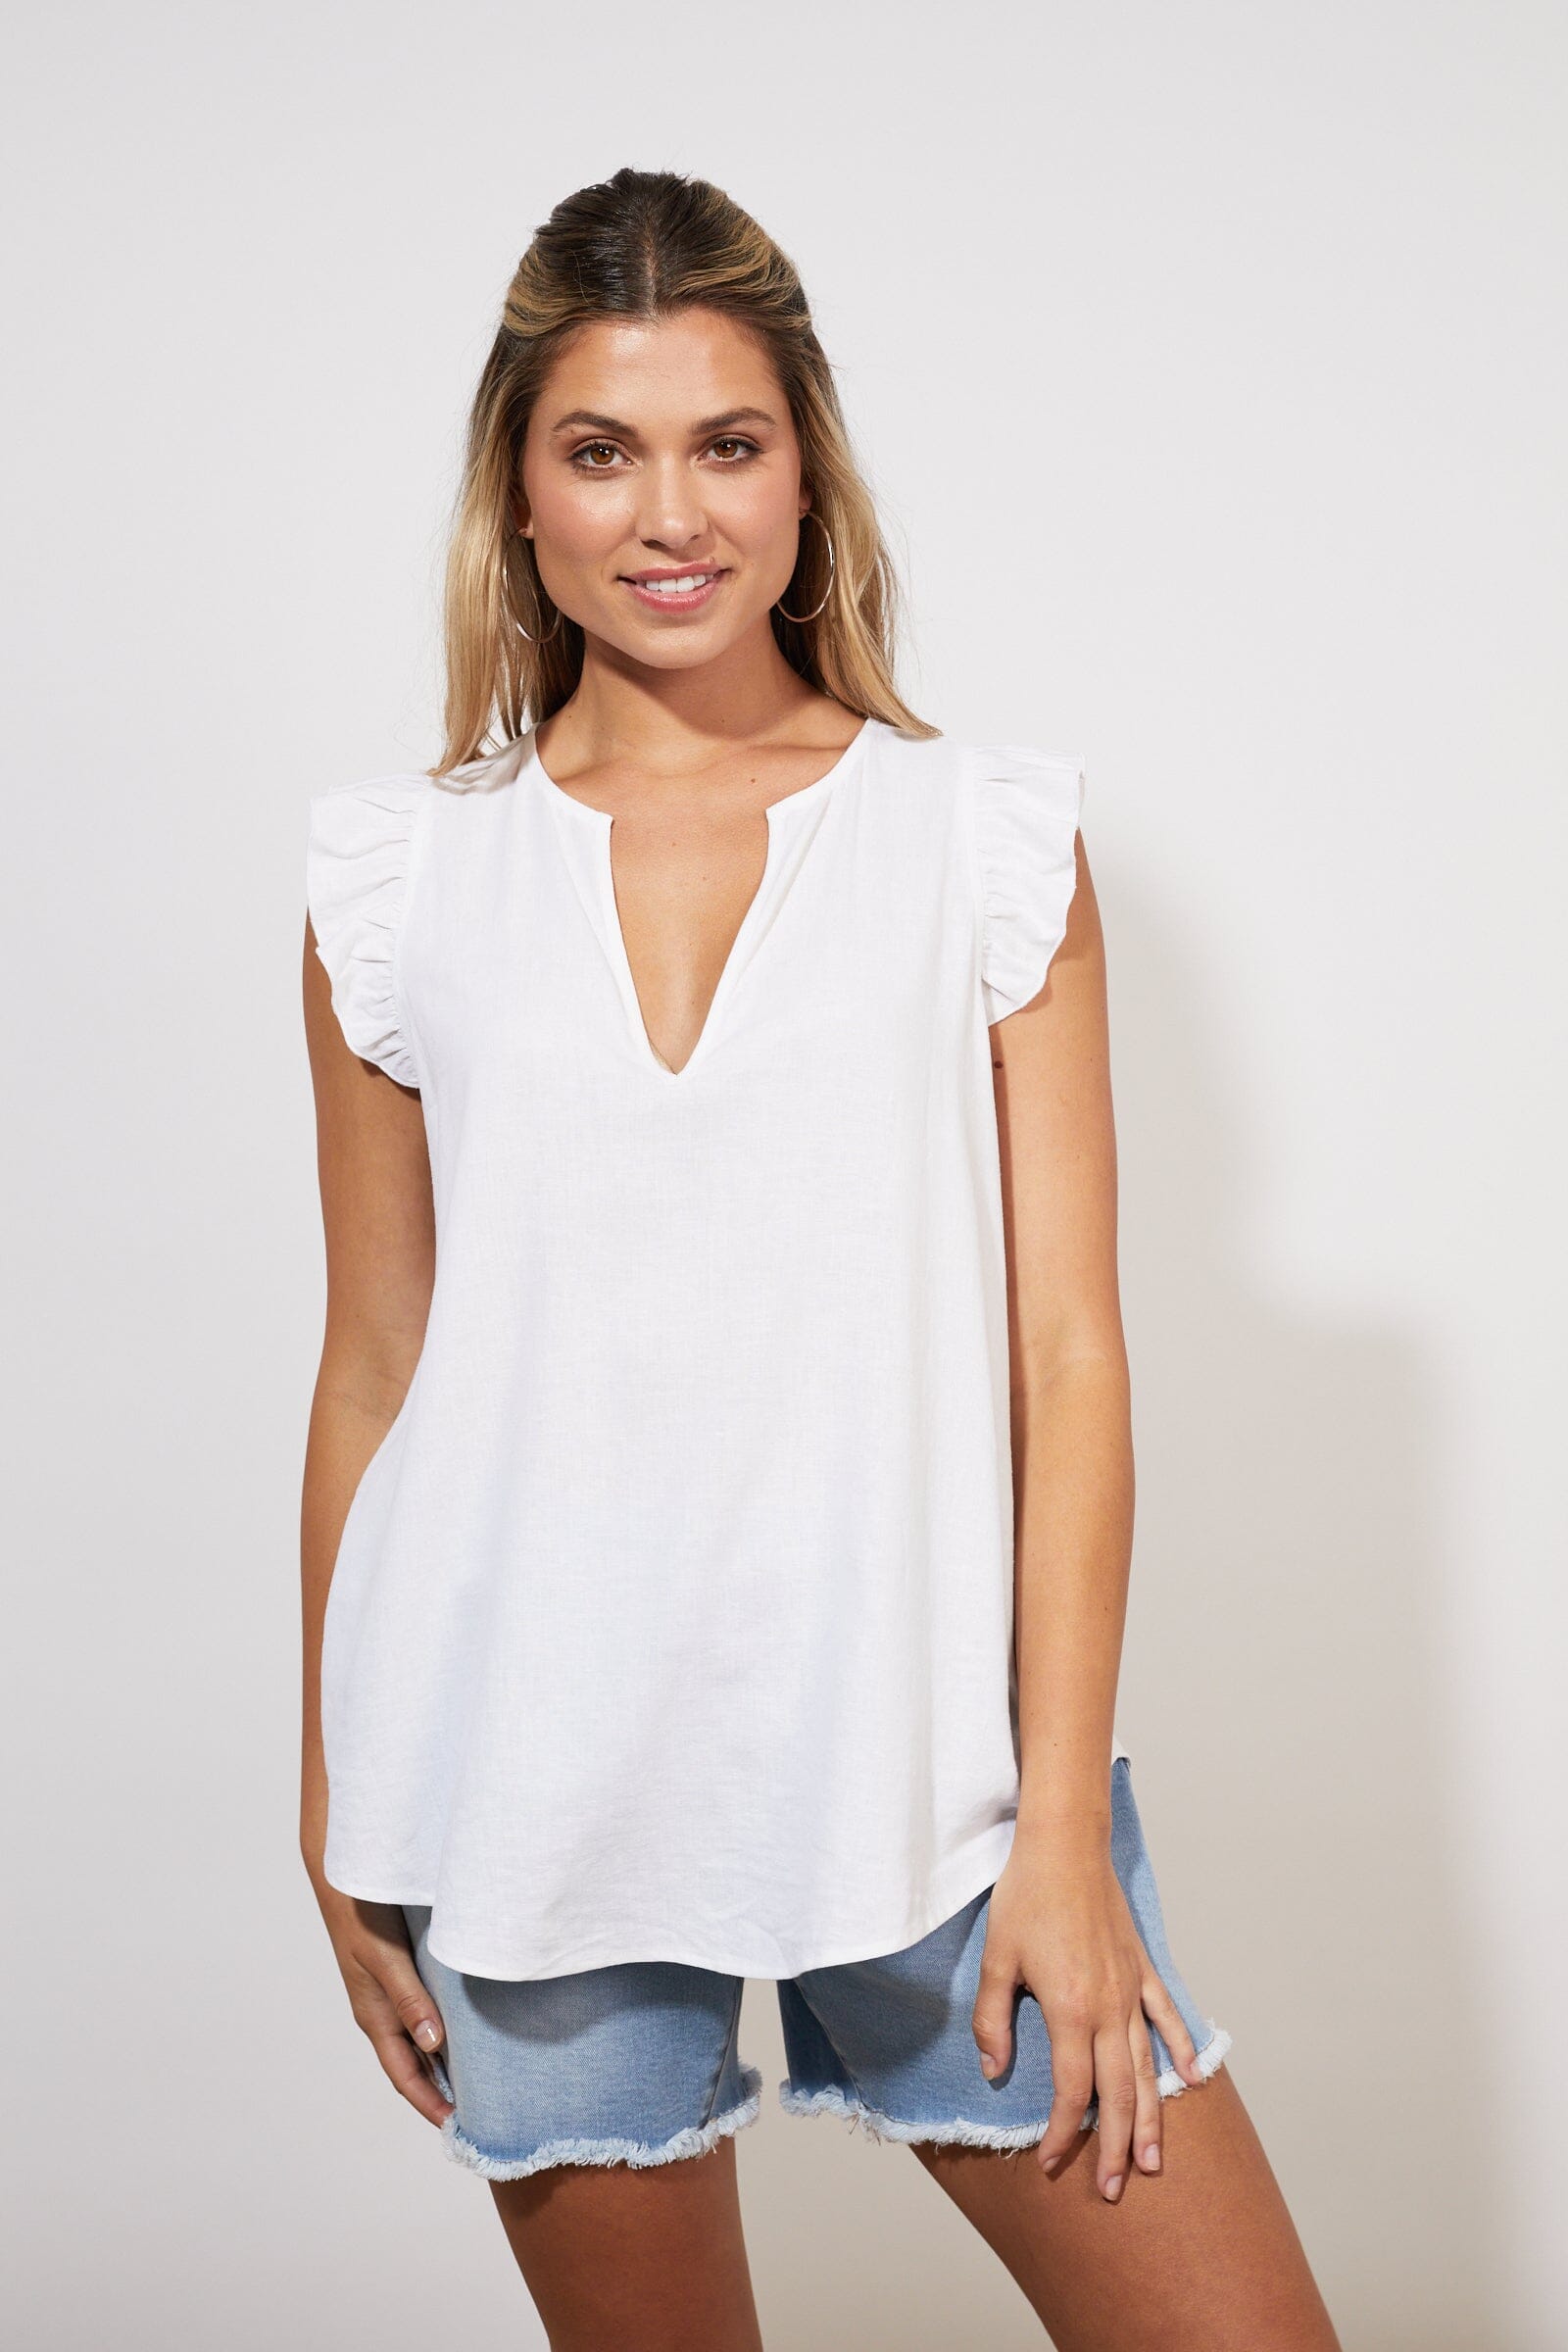 Haven - Tanna Frill Top - Coconut Womens Haven